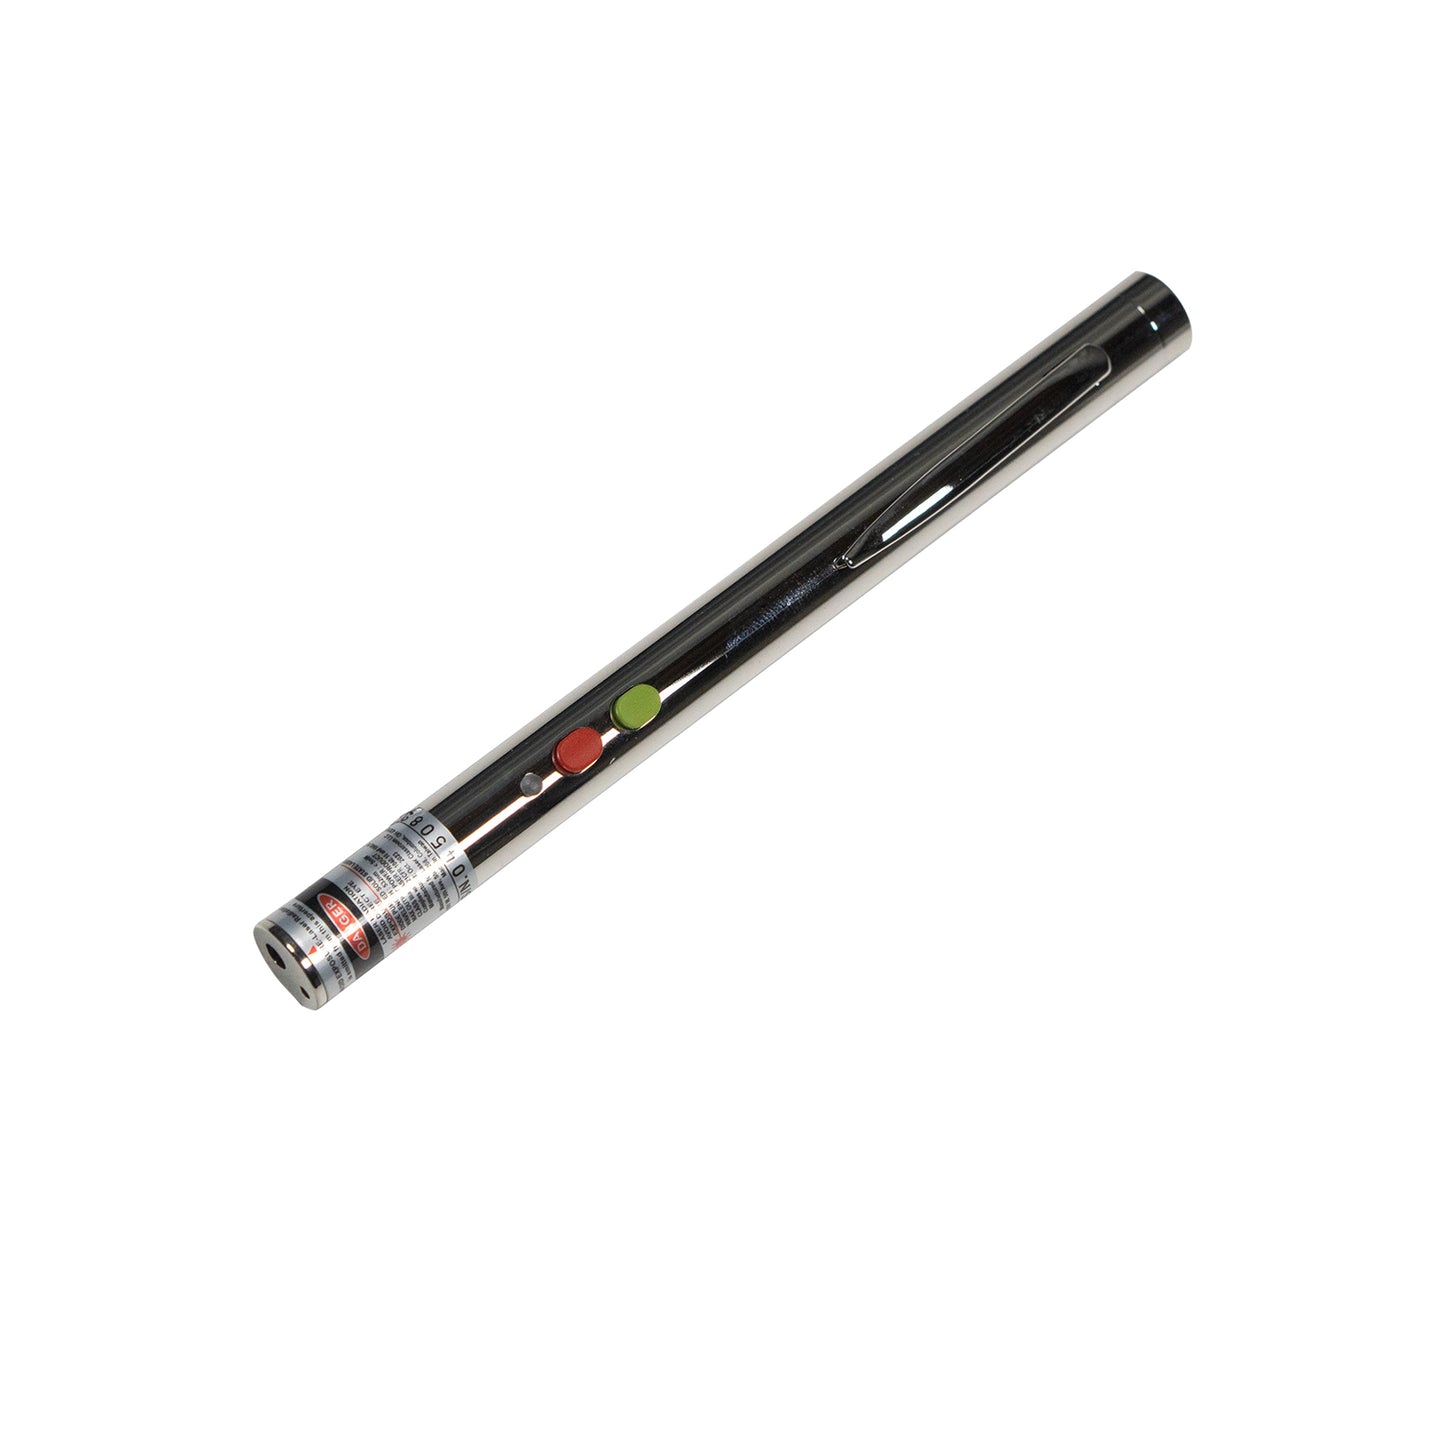 red and green switchable dual laser pen for classroom lessons and presentations